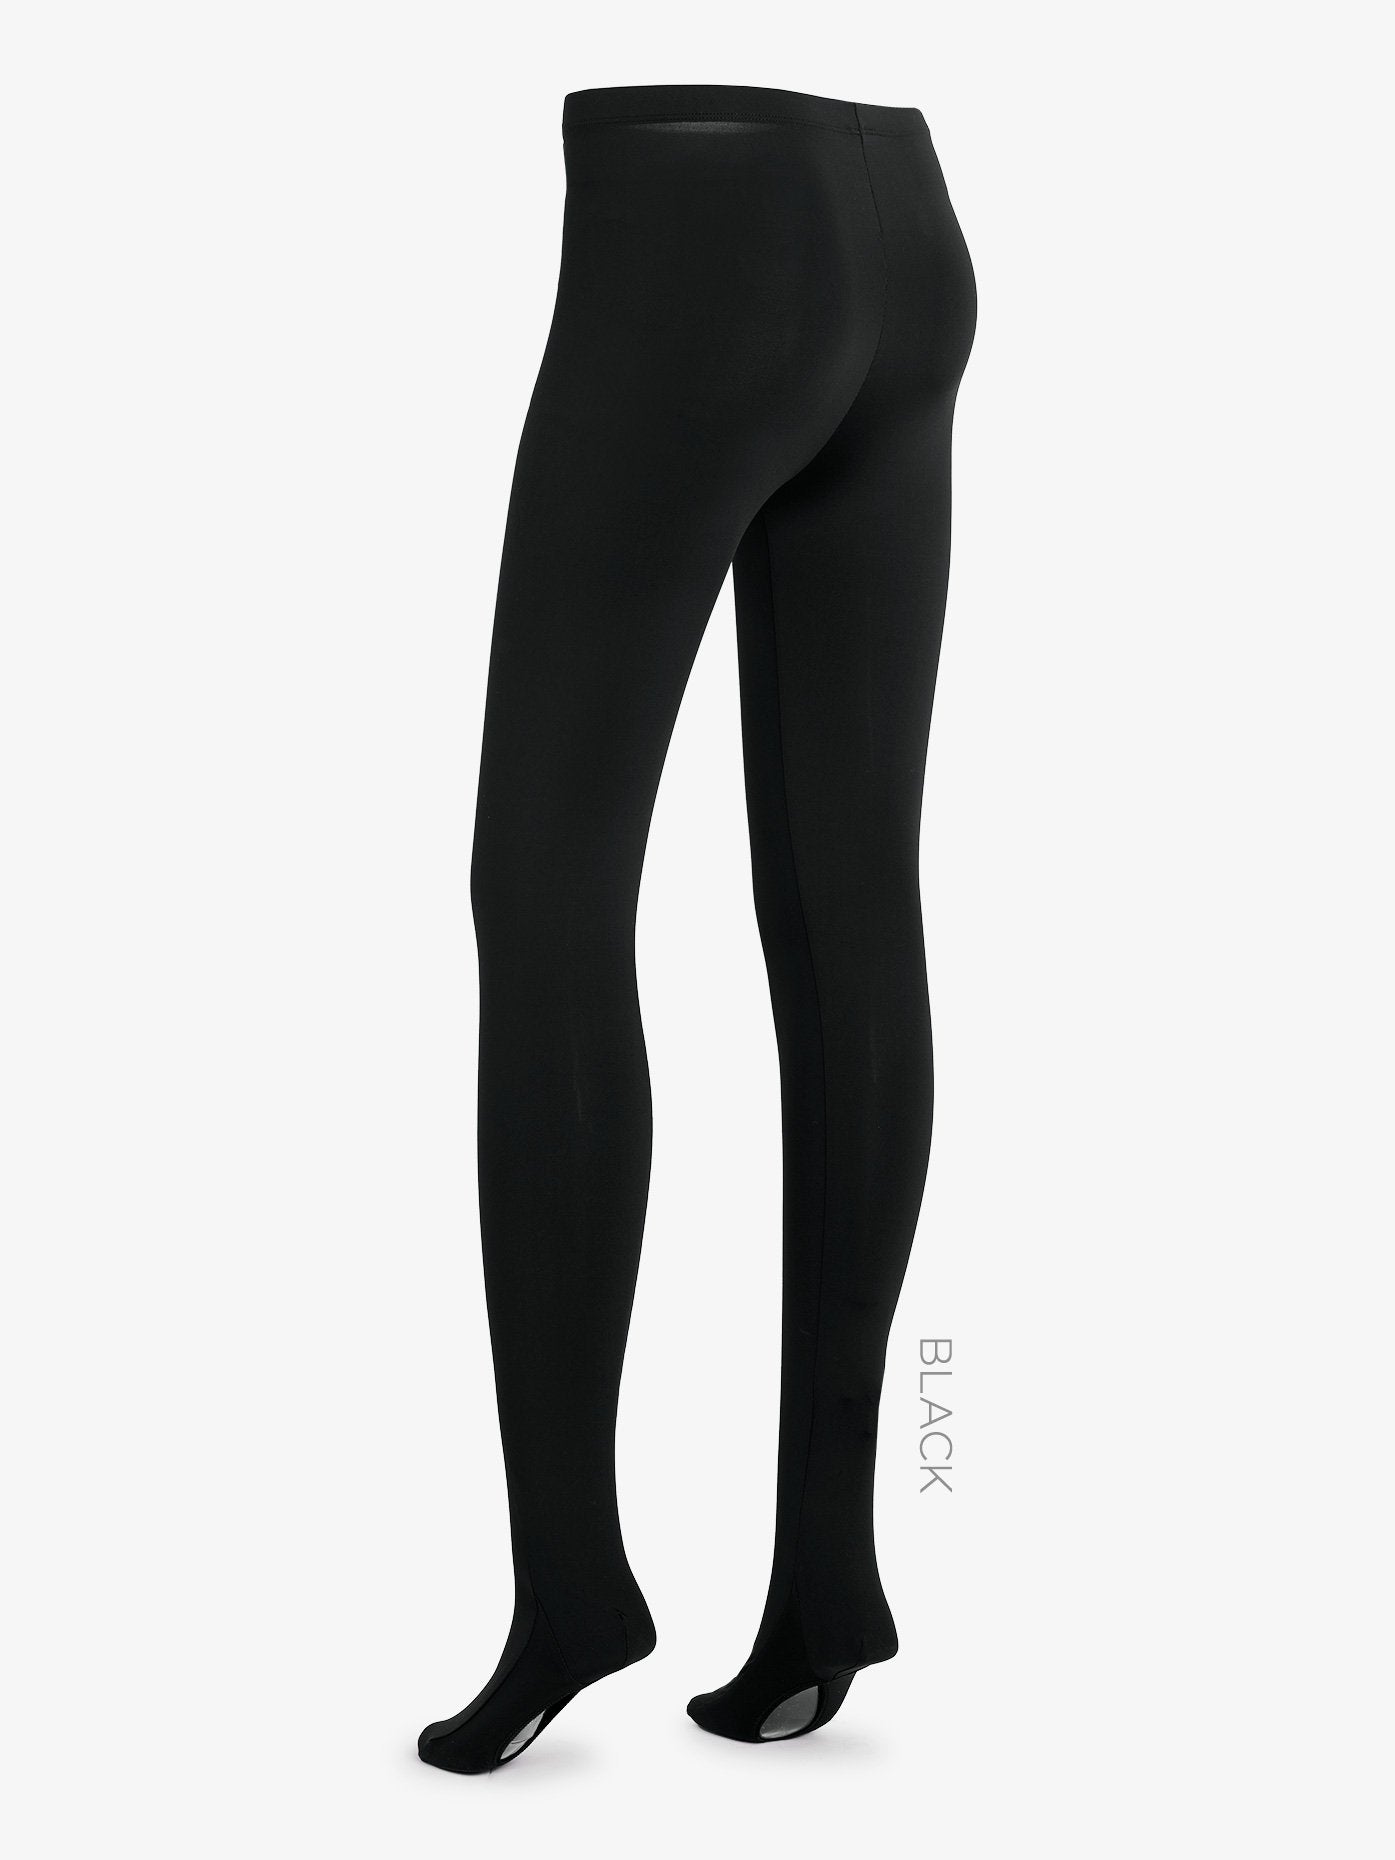 Boys 'Viggo' Convertible Dance Tights: Versatile and comfortable tights for young male dancers